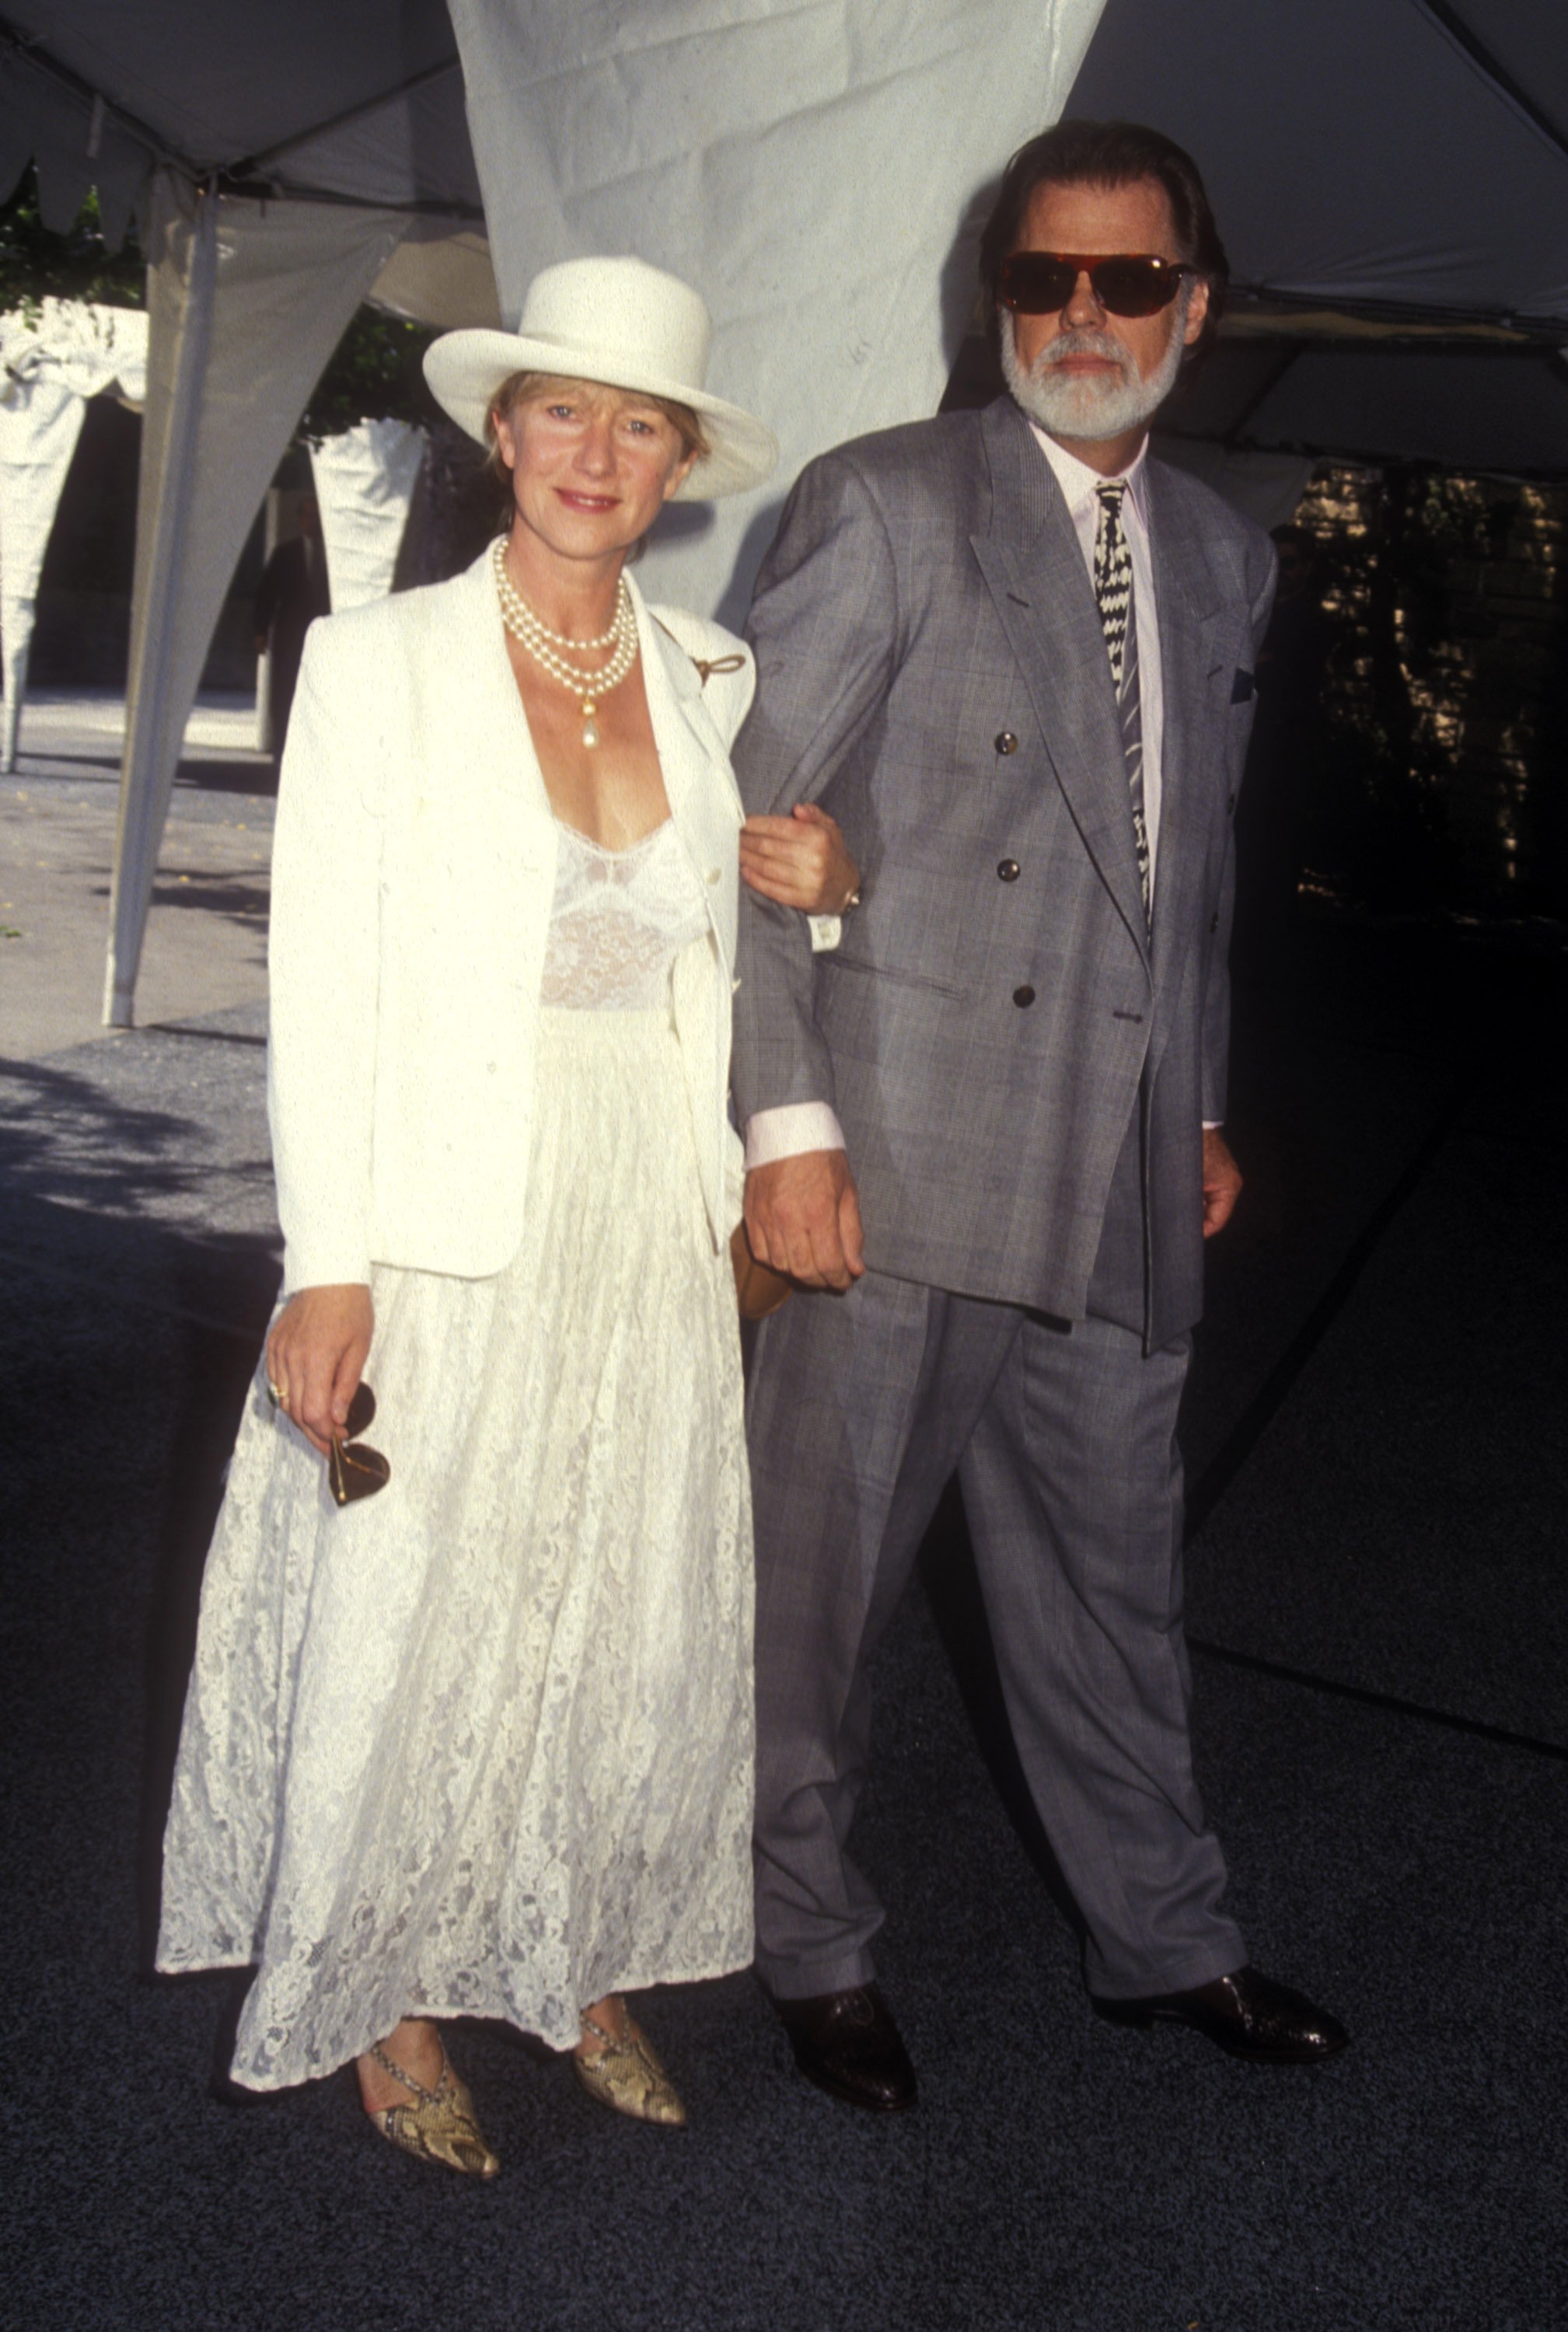 Helen Mirren and Taylor Hackford in Los Angeles, CA. | Source: Getty Images